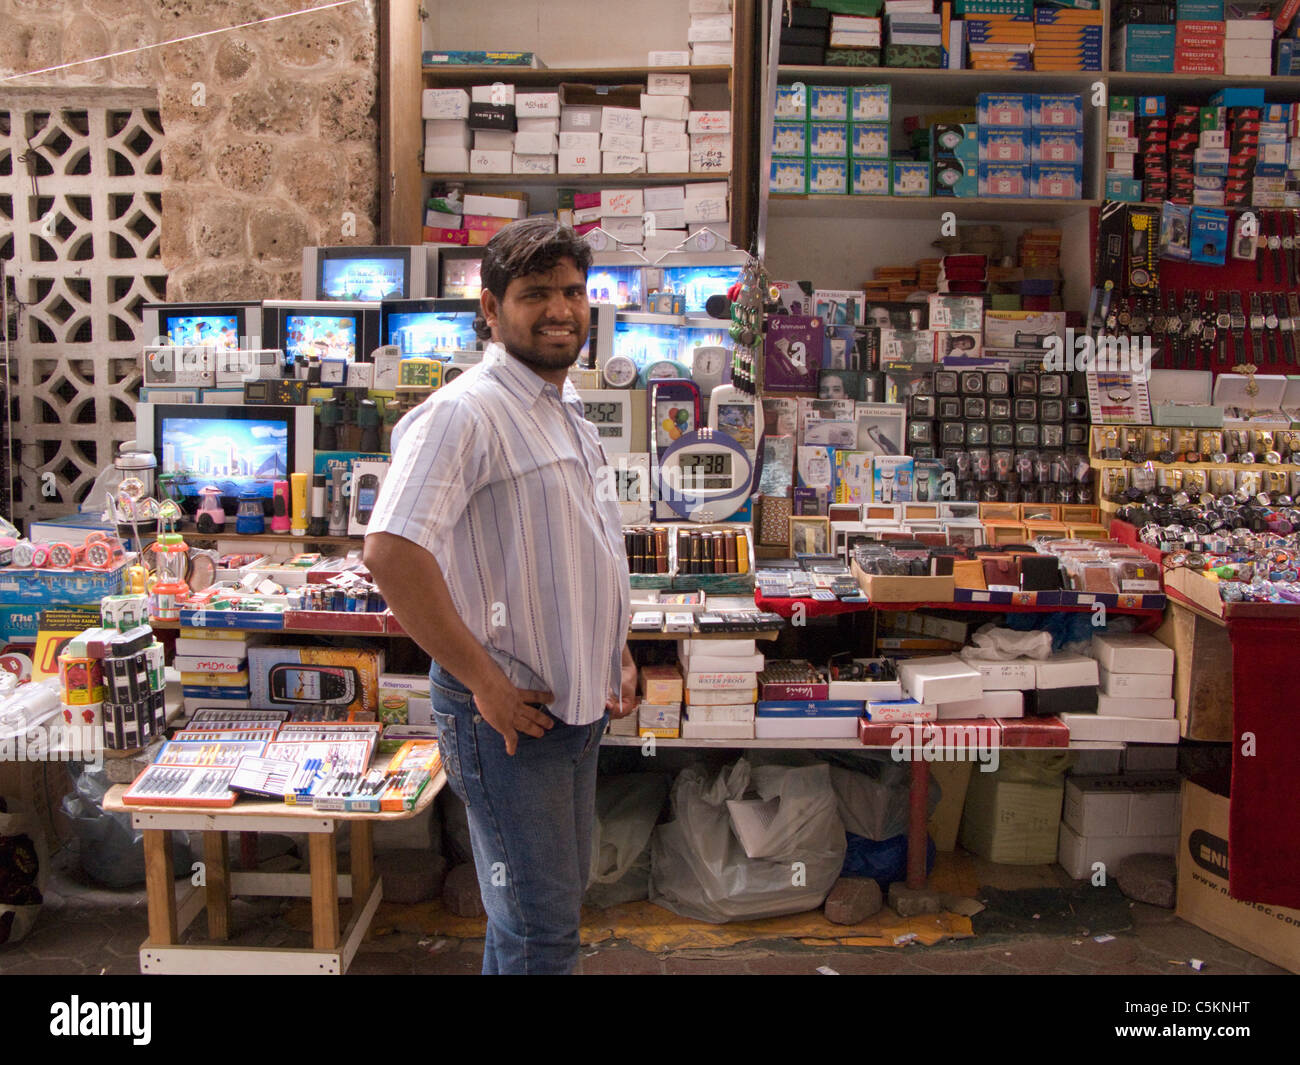 Man in front of his market stall in the Suq, Dubai, United Arab Emirates Stock Photo